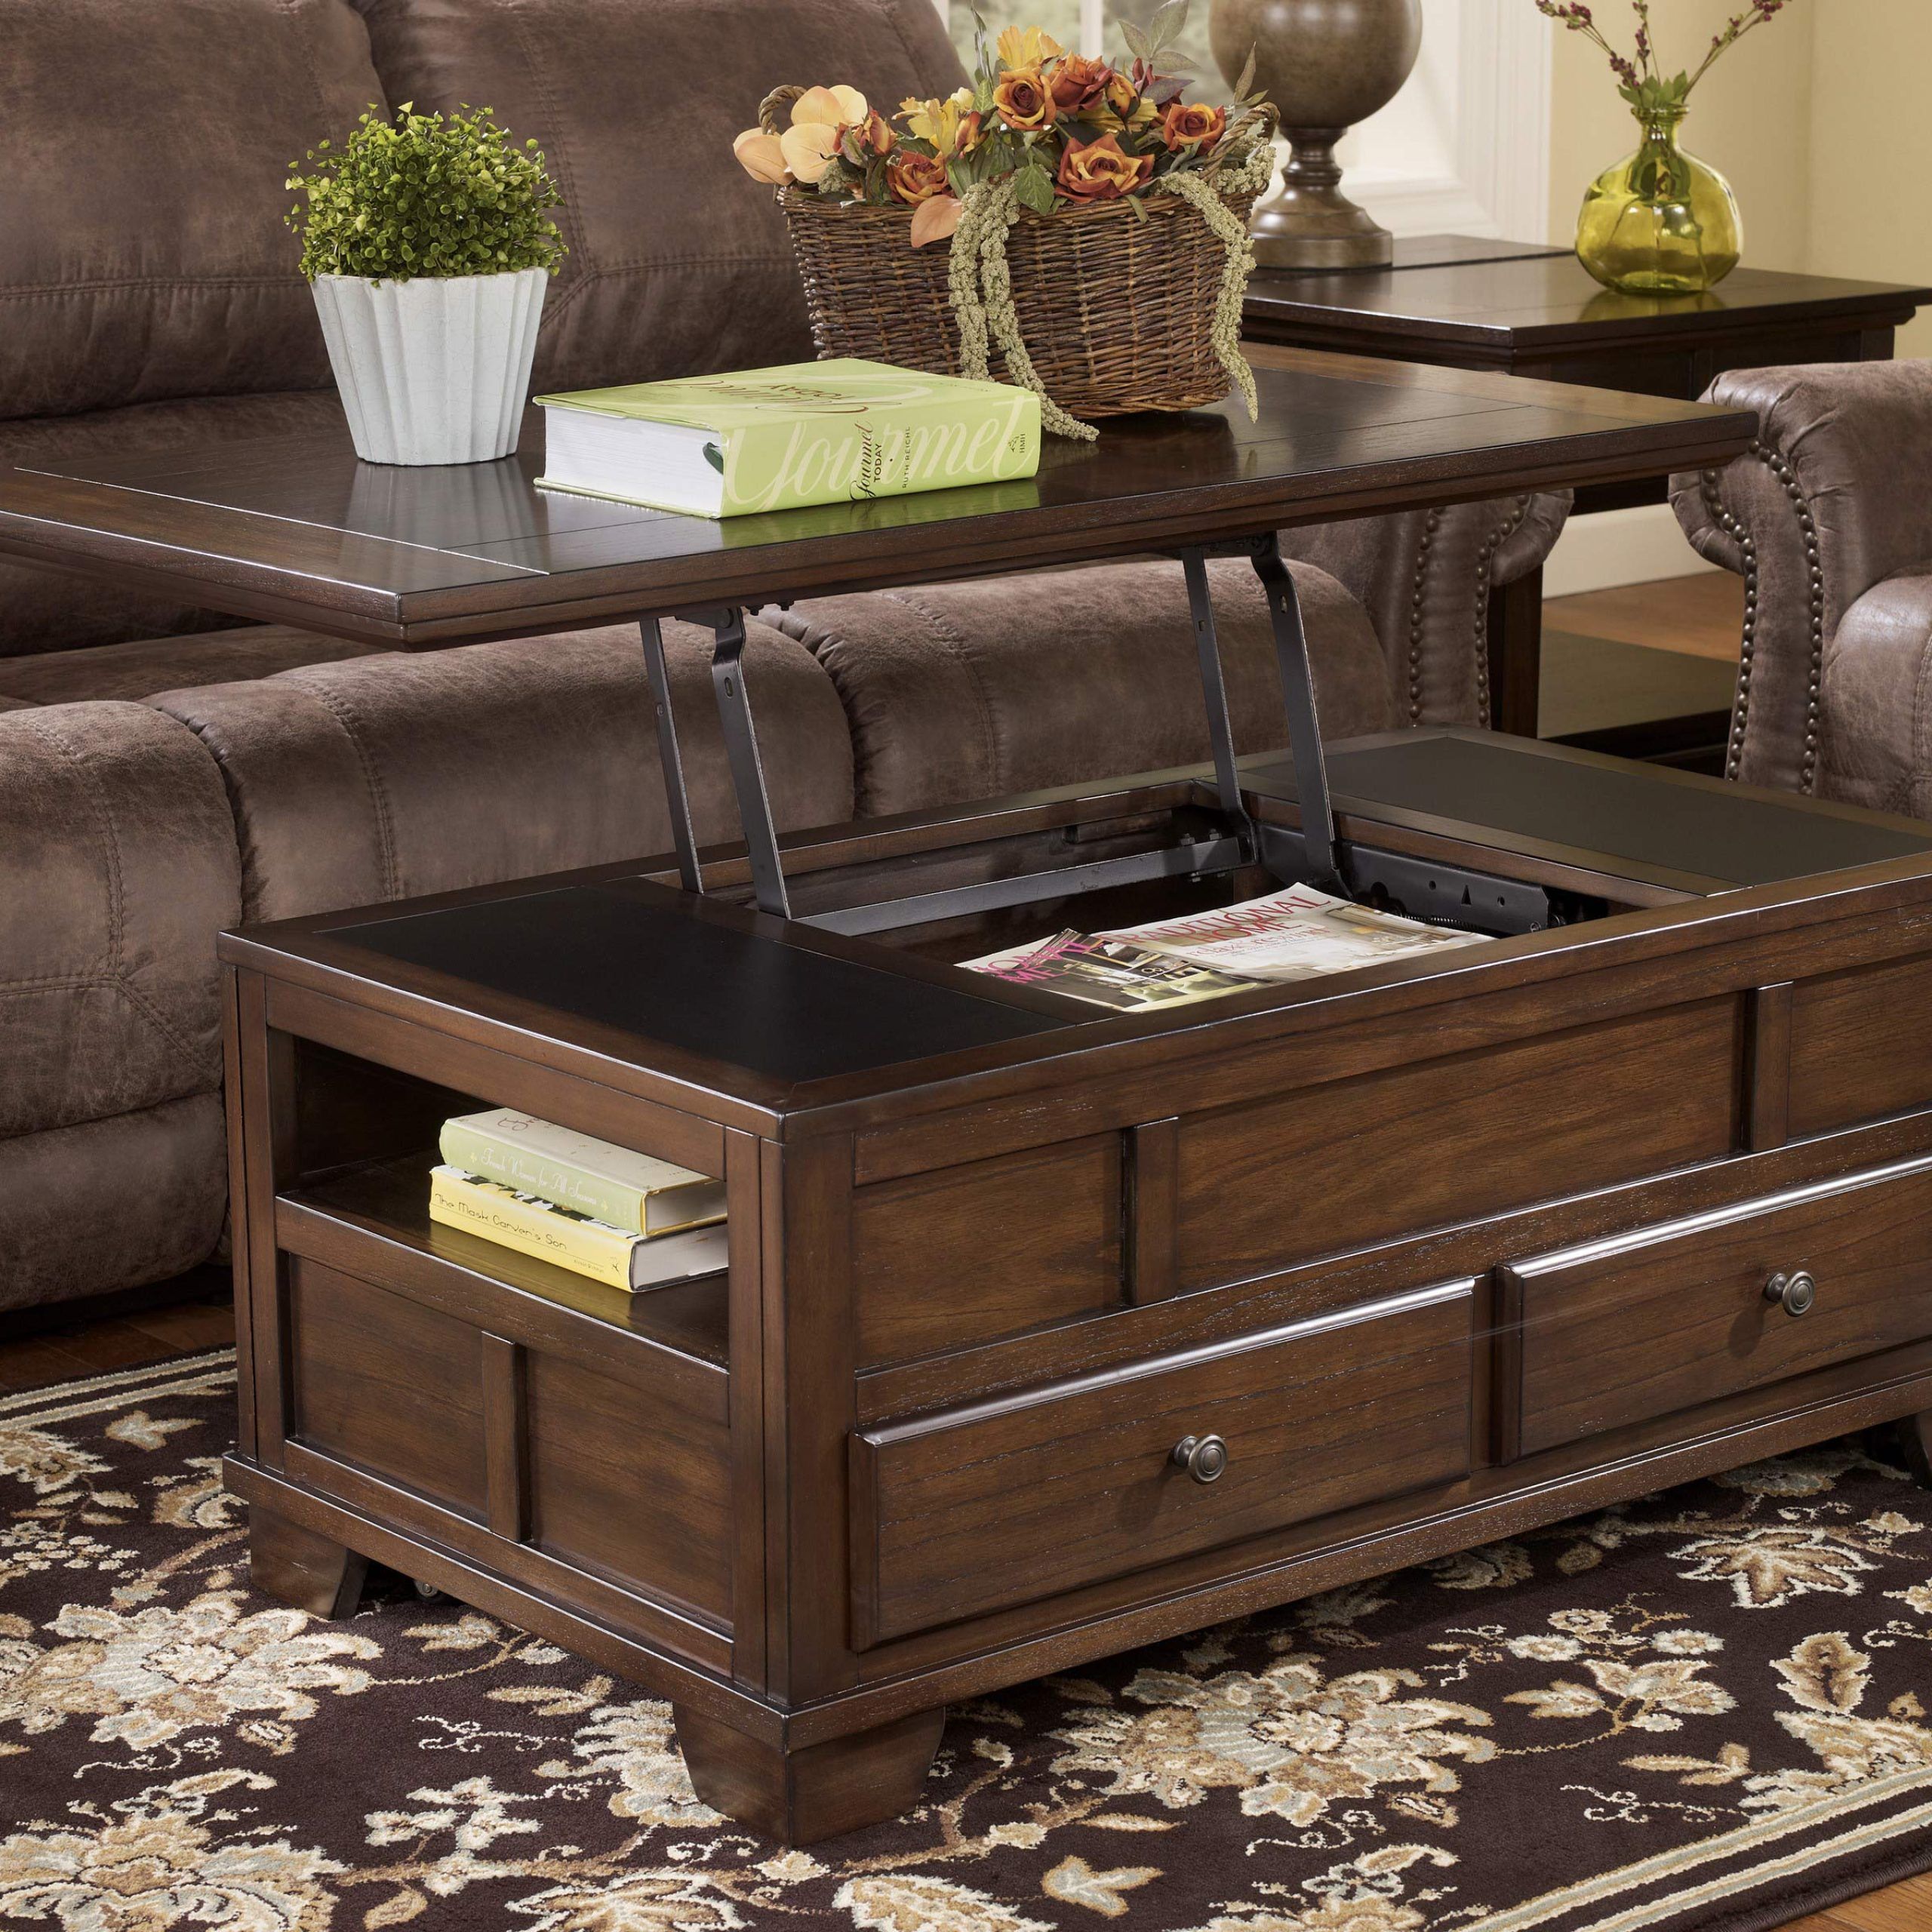 Lift Top Coffee Tables With Storage In Well Known Lift Top Coffee Tables With Shelves (View 4 of 15)